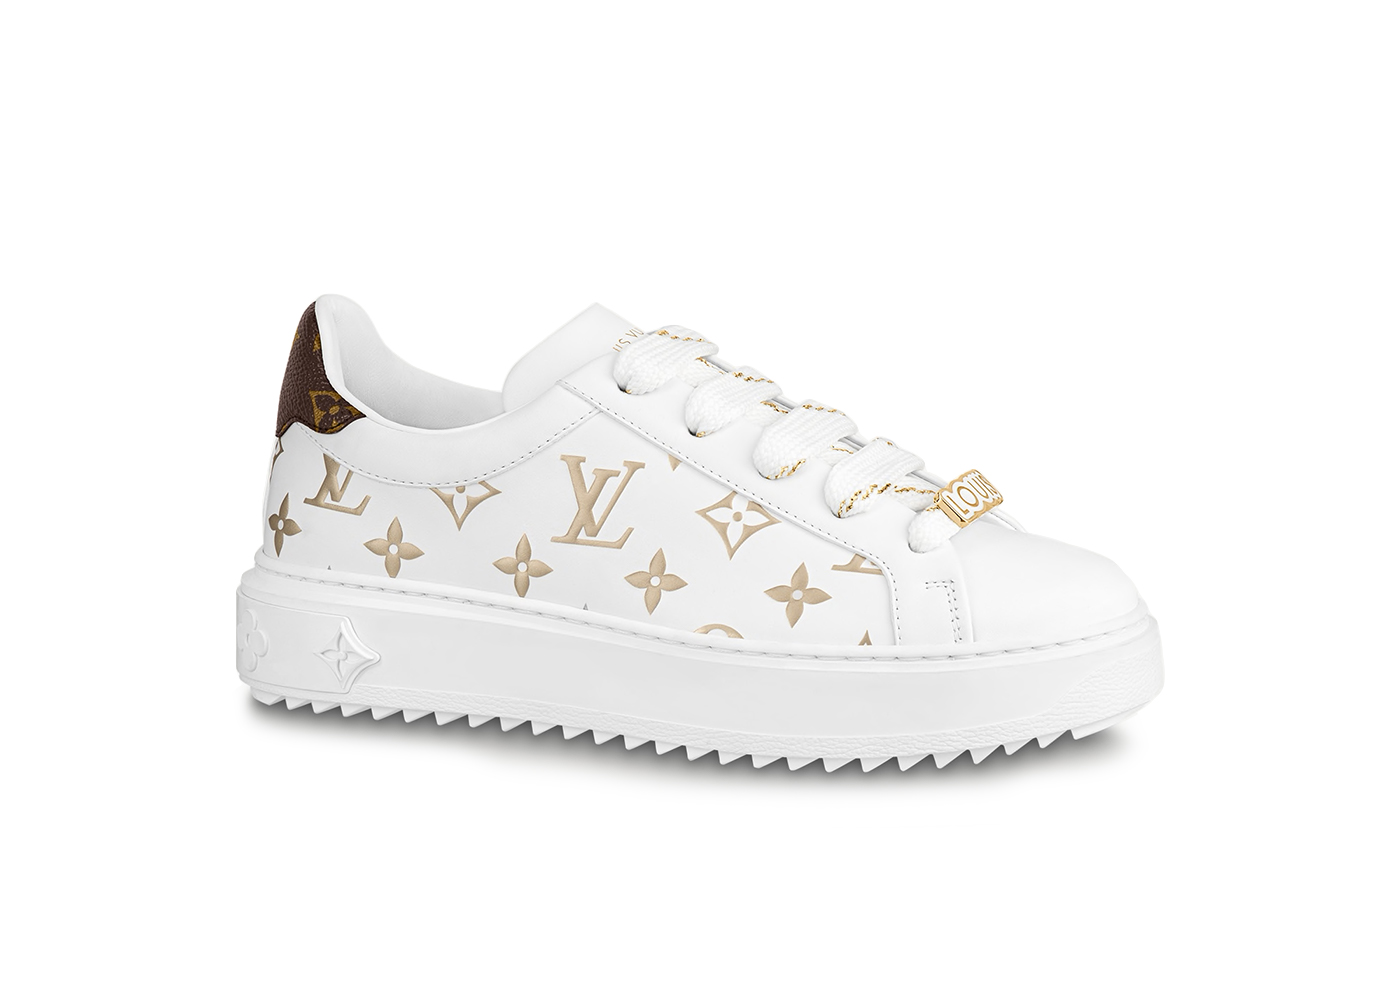 LOUIS VUITTON Monogram By The Pool Time Out Sneakers 385 Rose 802891   FASHIONPHILE